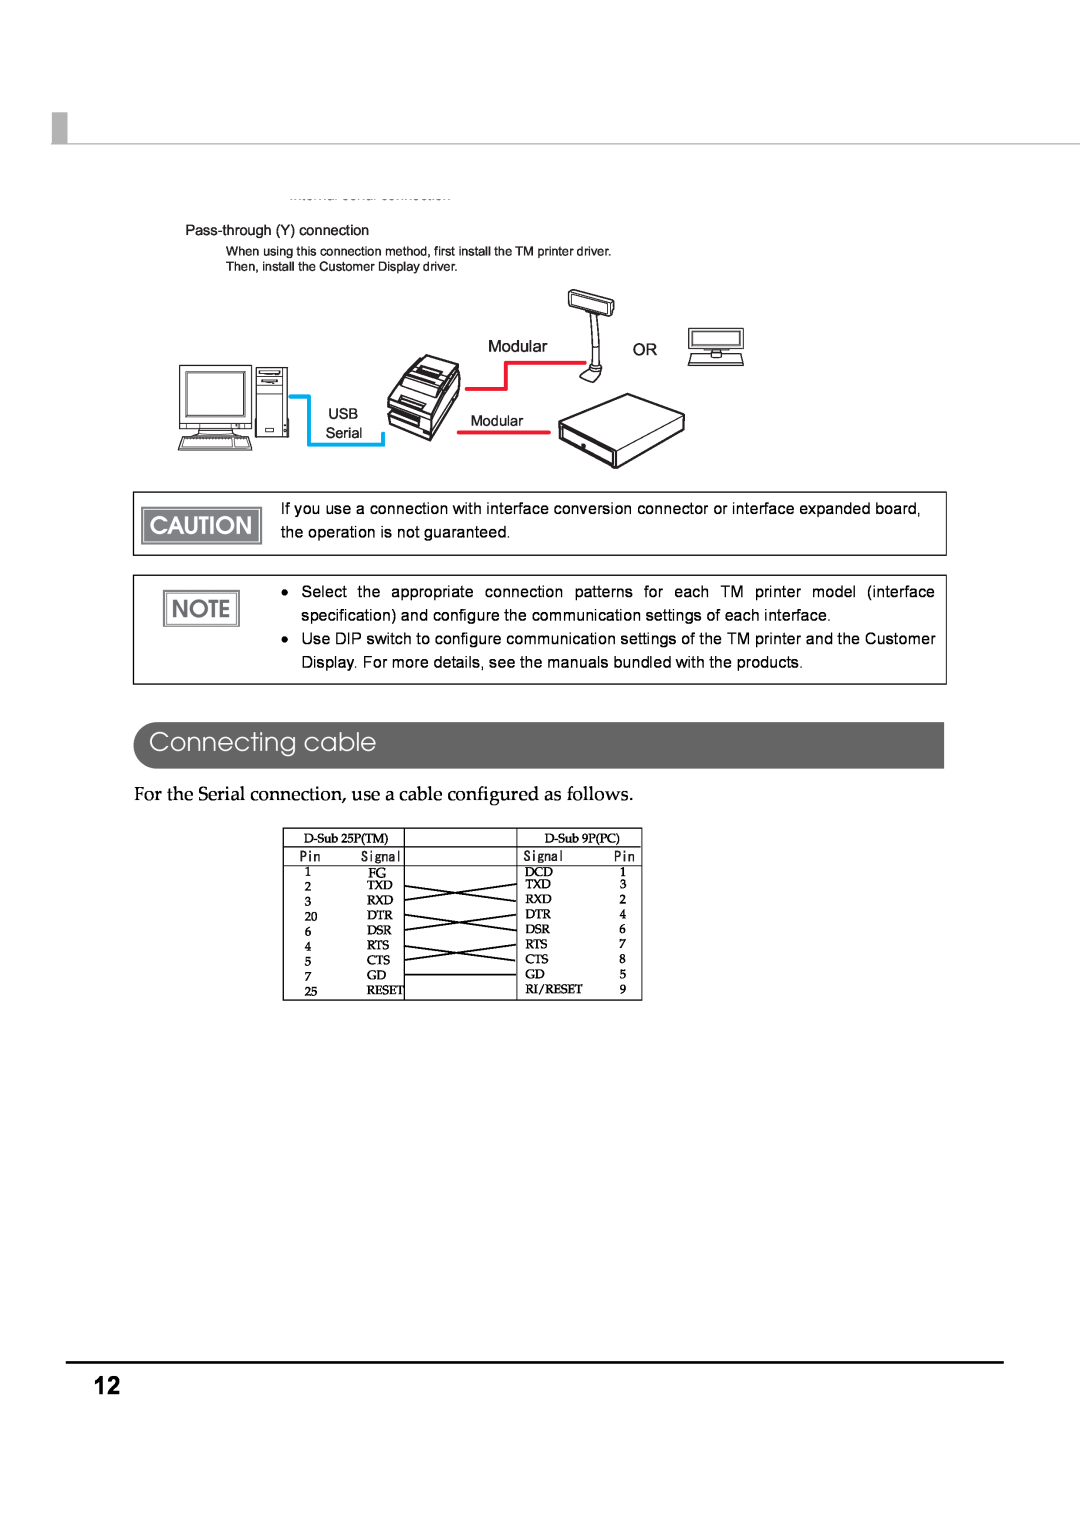 Epson M00002104 install manual Connecting cable, For the Serial connection, use a cable configured as follows 